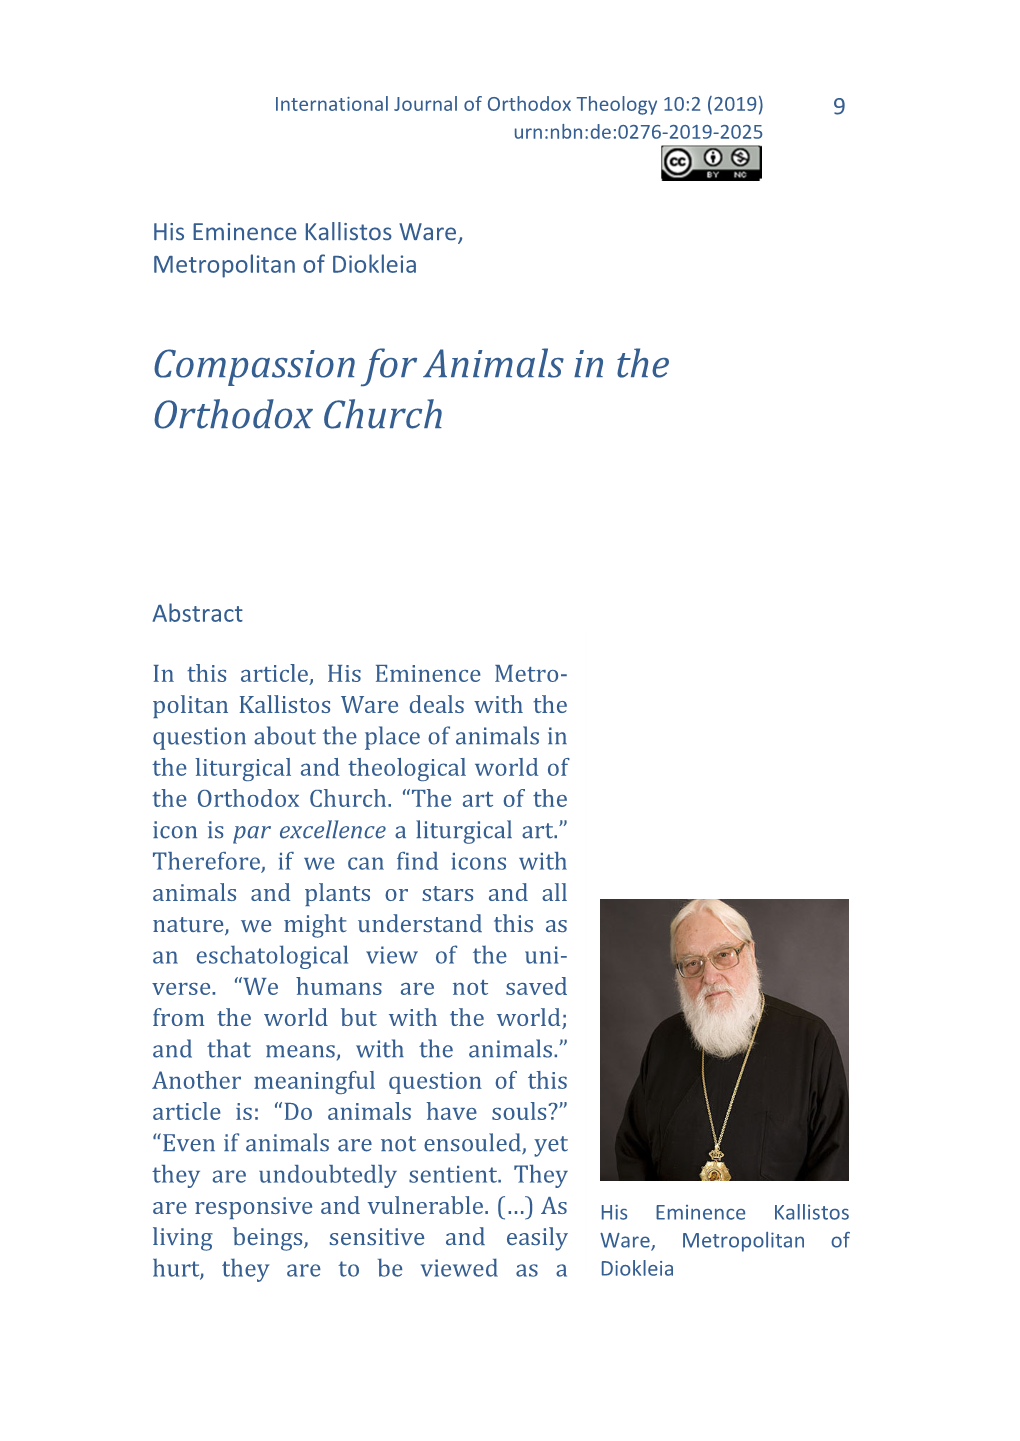 Compassion for Animals in the Orthodox Church